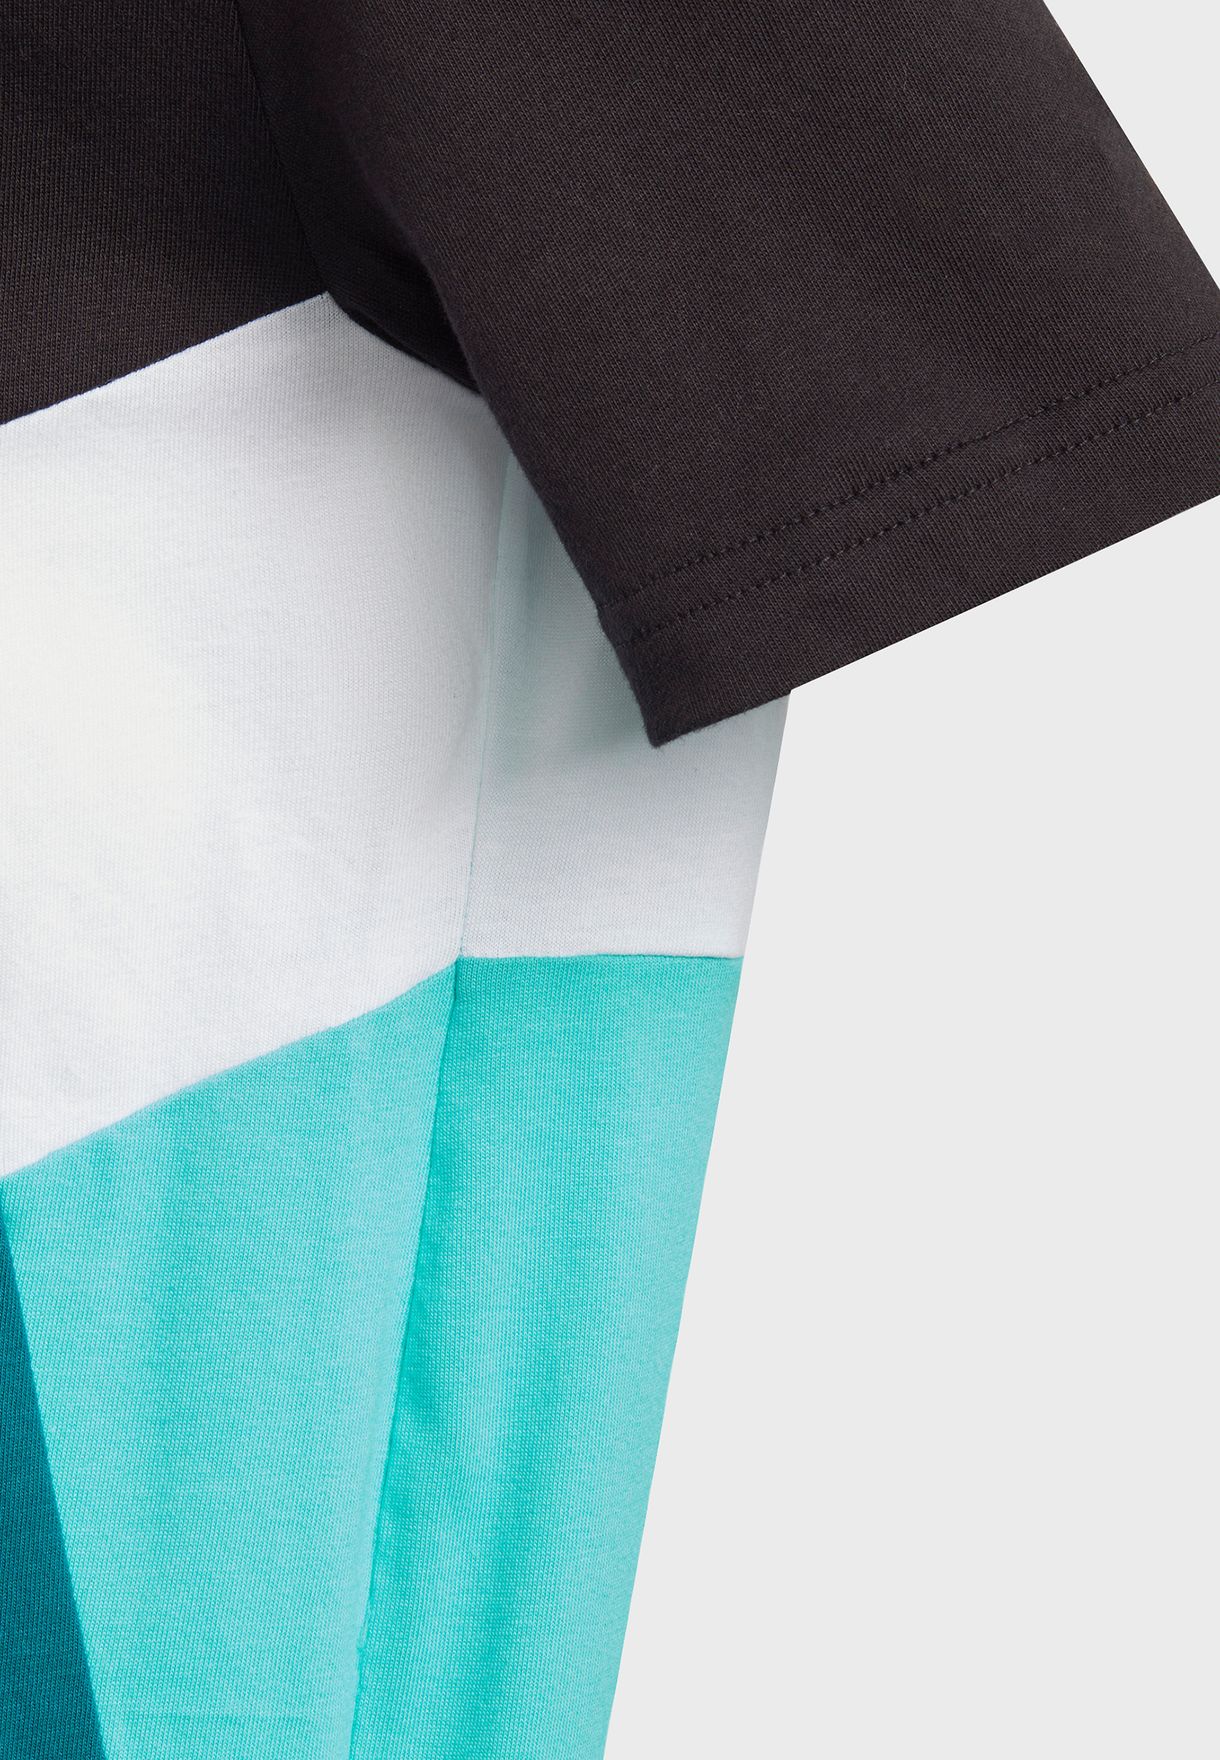 Youth Colorblock T-Shirt